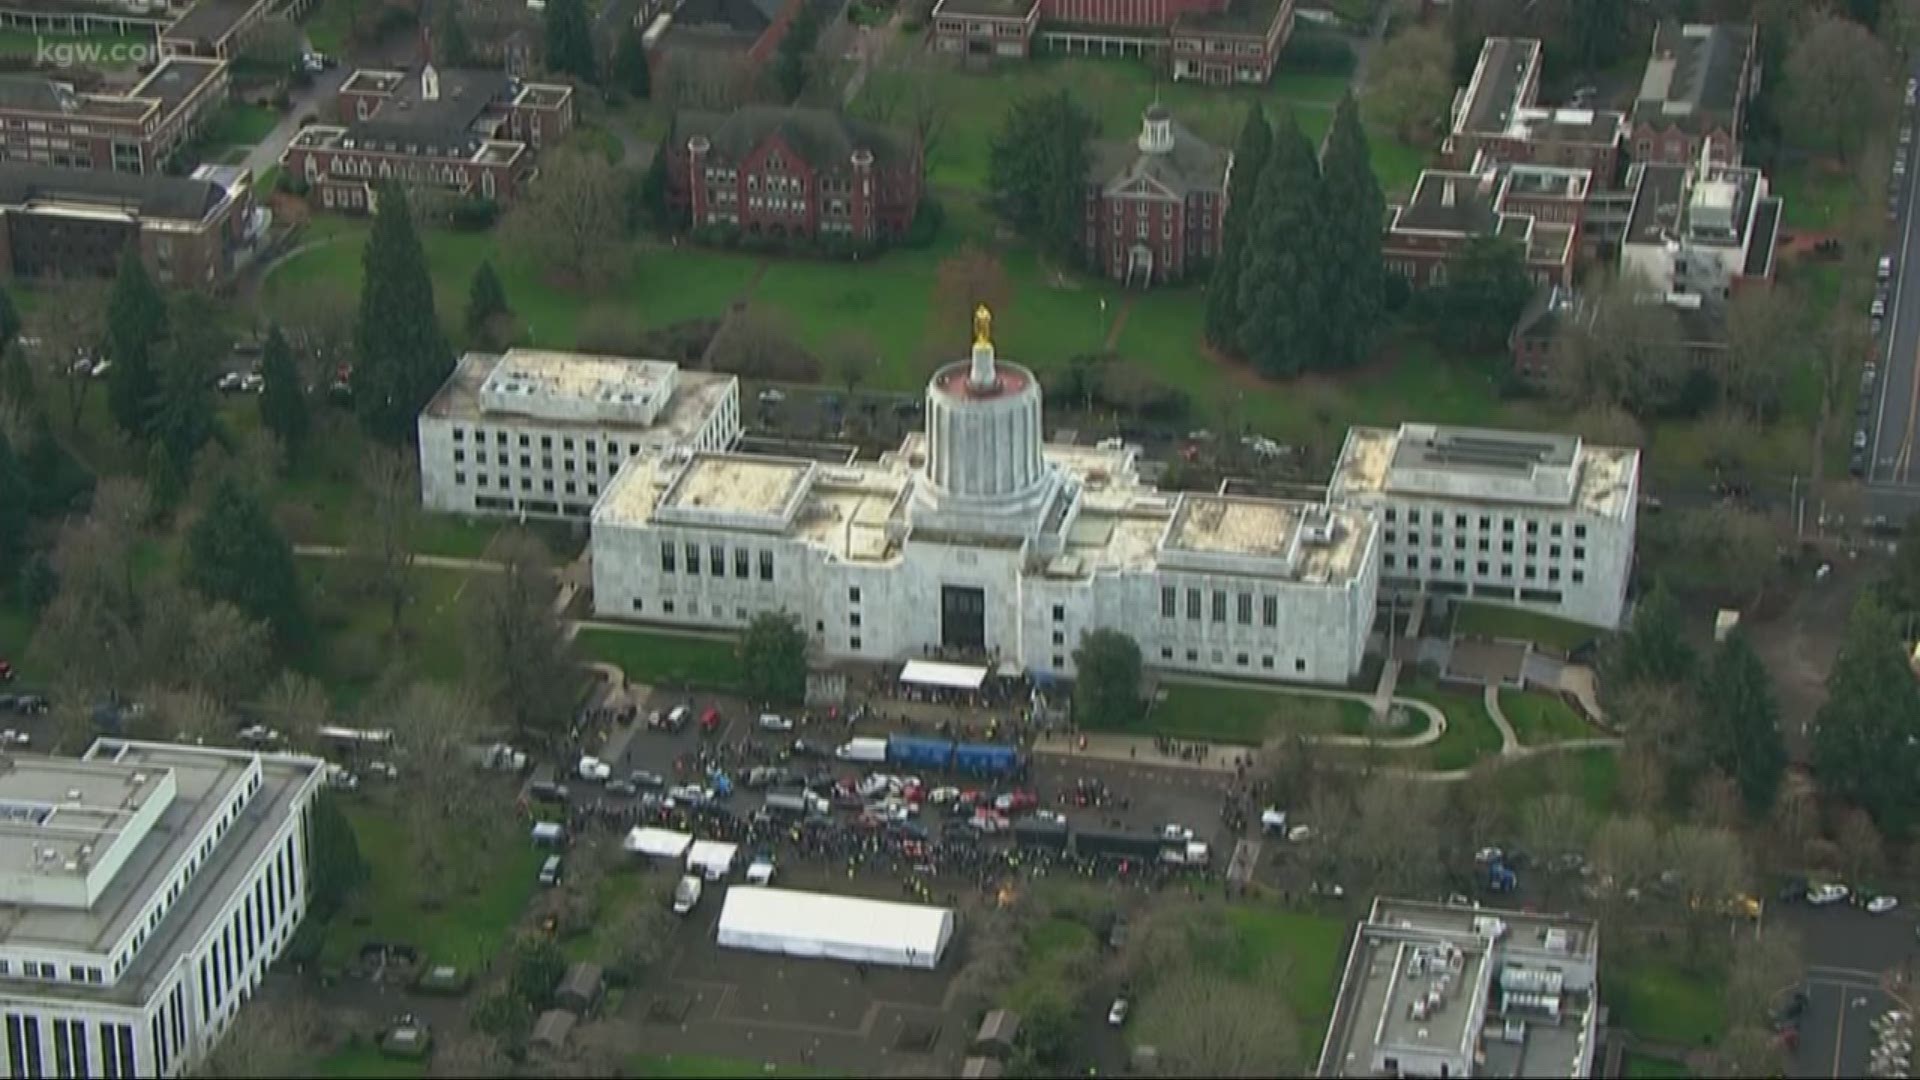 Opponents and supporters of a cap and trade bill rallied in Salem and Portland today. Pat Dooris reports.